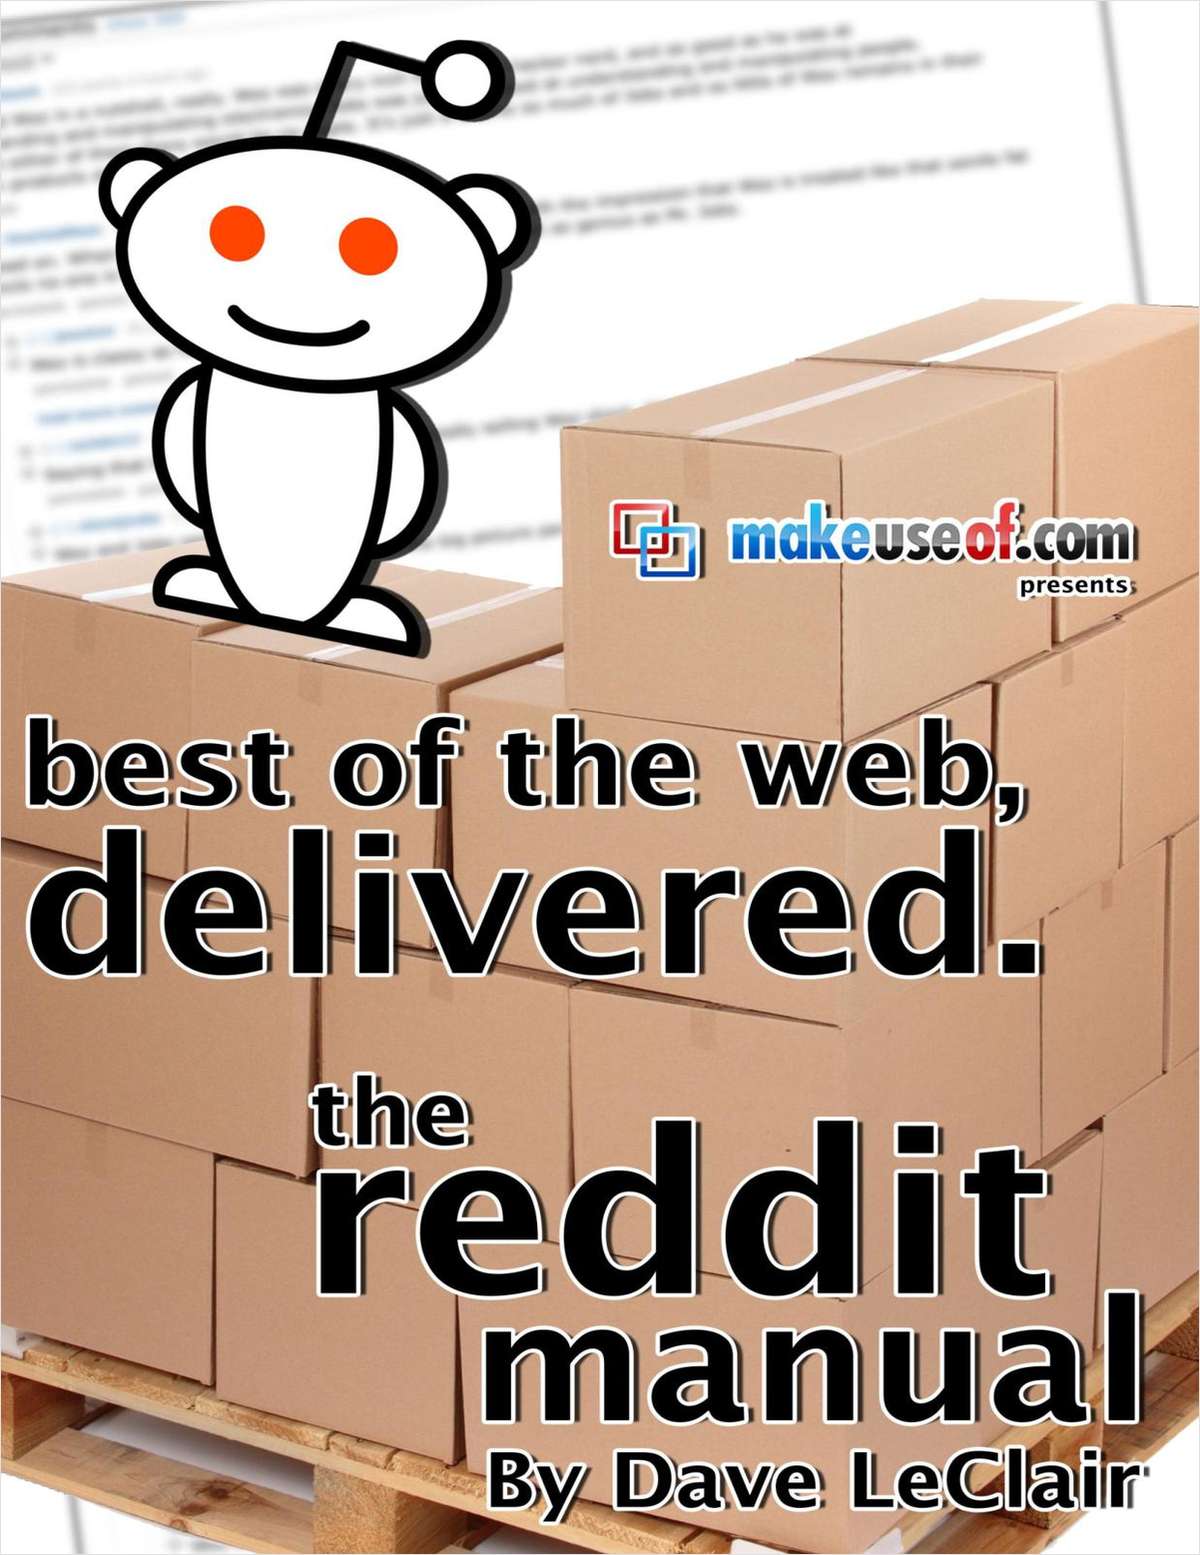 The Awesome Guide to Reddit